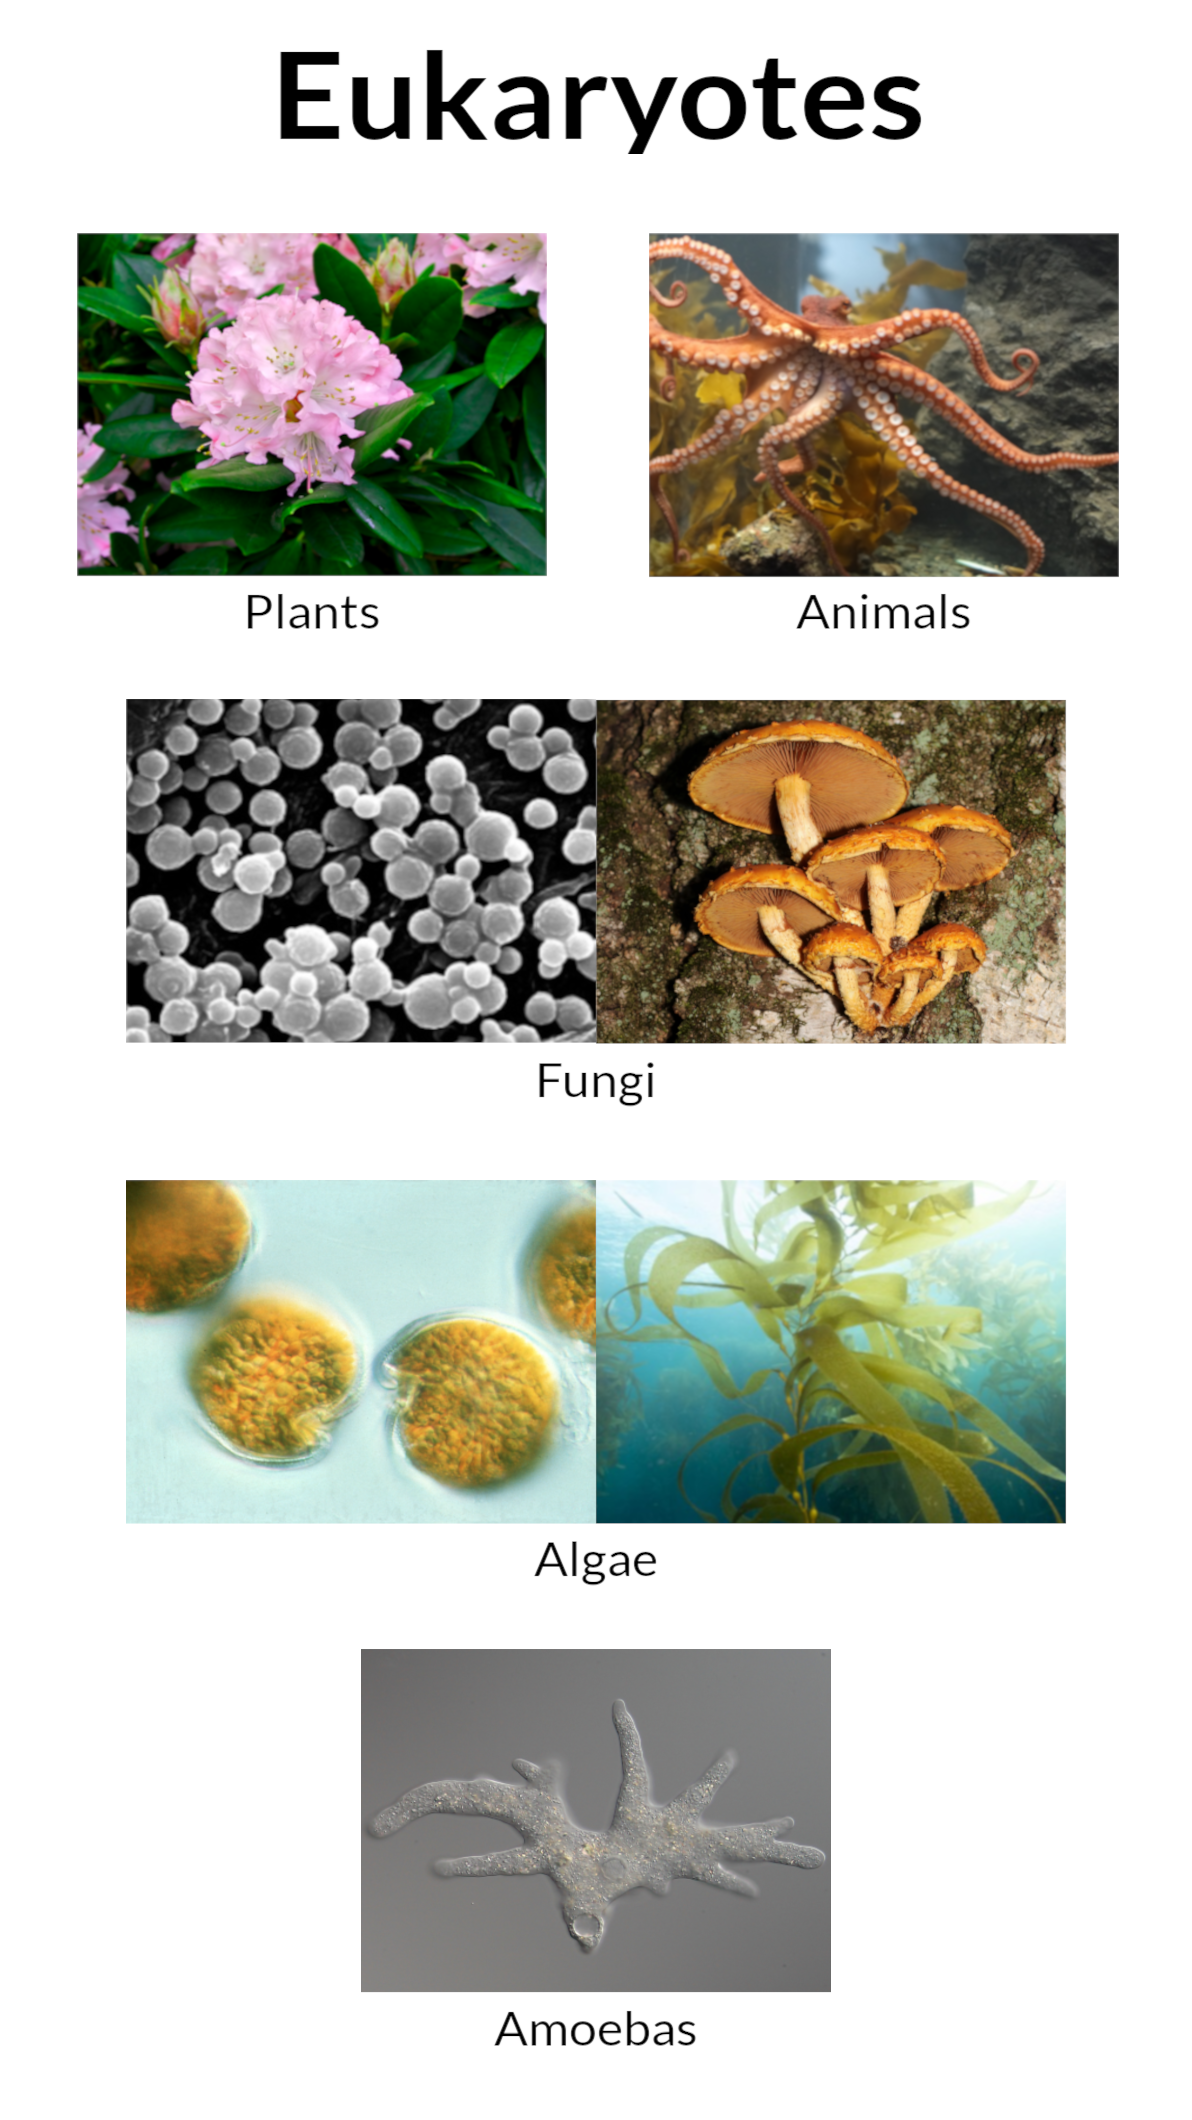 Images of various eukaryotes. The title at the top says 'Eukaryotes'. Under that there is a picture of a plant (a rhodoendron) labelled "plants" and a picture of an octopus labelled "animals". Beneath those there is a picture of some unicellular fungi and a picture of some mushrooms - these two pictures are labelled "fungi". Under that there is a picture of some unicellular algae and a picture of some seaweed - these are labelled "algae". Beneath that is a picture of an amoeba labelled "amoebas".